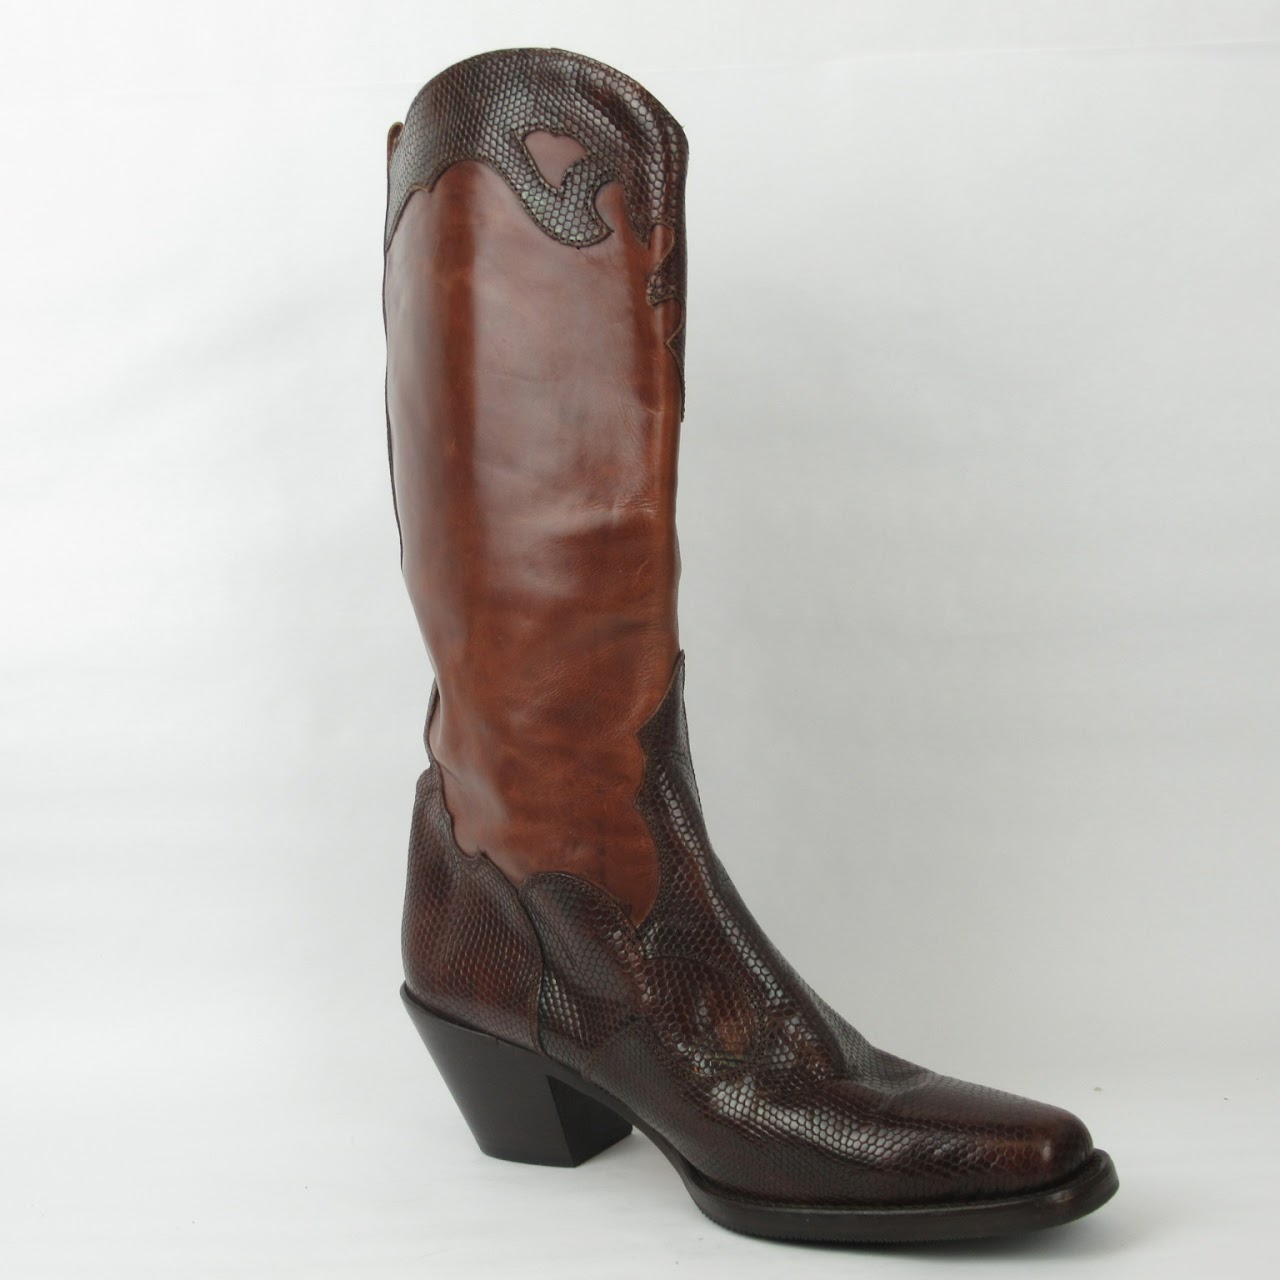 Joan & David Leather Cowboy-Style Boots